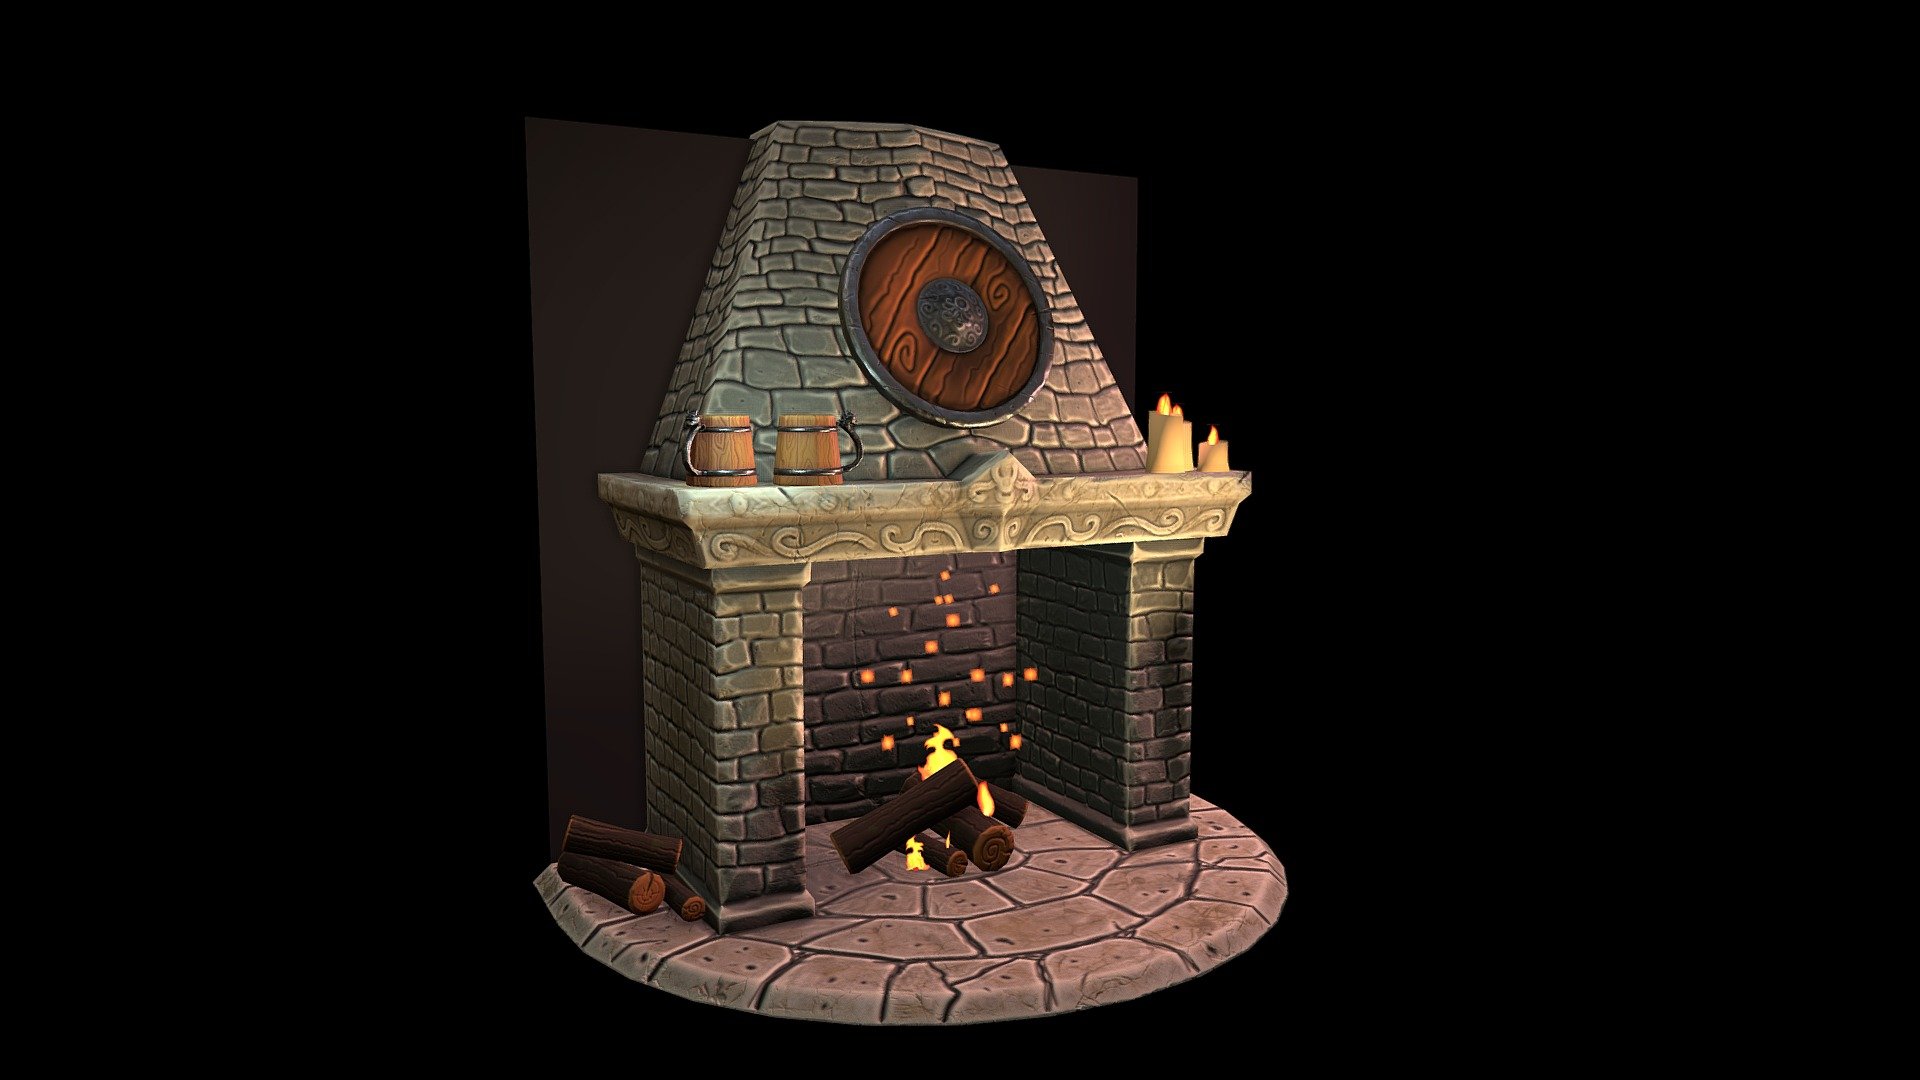 Old medieval tavern stylized fireplace. Low poly asset for fantasy cartoon environment. Optimized for real-time game AR VR engines.



Fireplace: 4k PBR PNG textures of Color, Roughness, AO and Normal map.


Logs, fire and candles: 2K PBR PNG textures of Color, Normal map, Roughness, Emission and Transparency. 


Shield: 2K PBR PNG textures of Color, Normal map, Roughness, and Metalness


Beermug: 2K PBR PNG textures of Color, Normal map, Roughness, and Metalness



Please check my portfolio to find more models in the same style for sale and free. Message me if you have any questions or problems with this asset 3d model